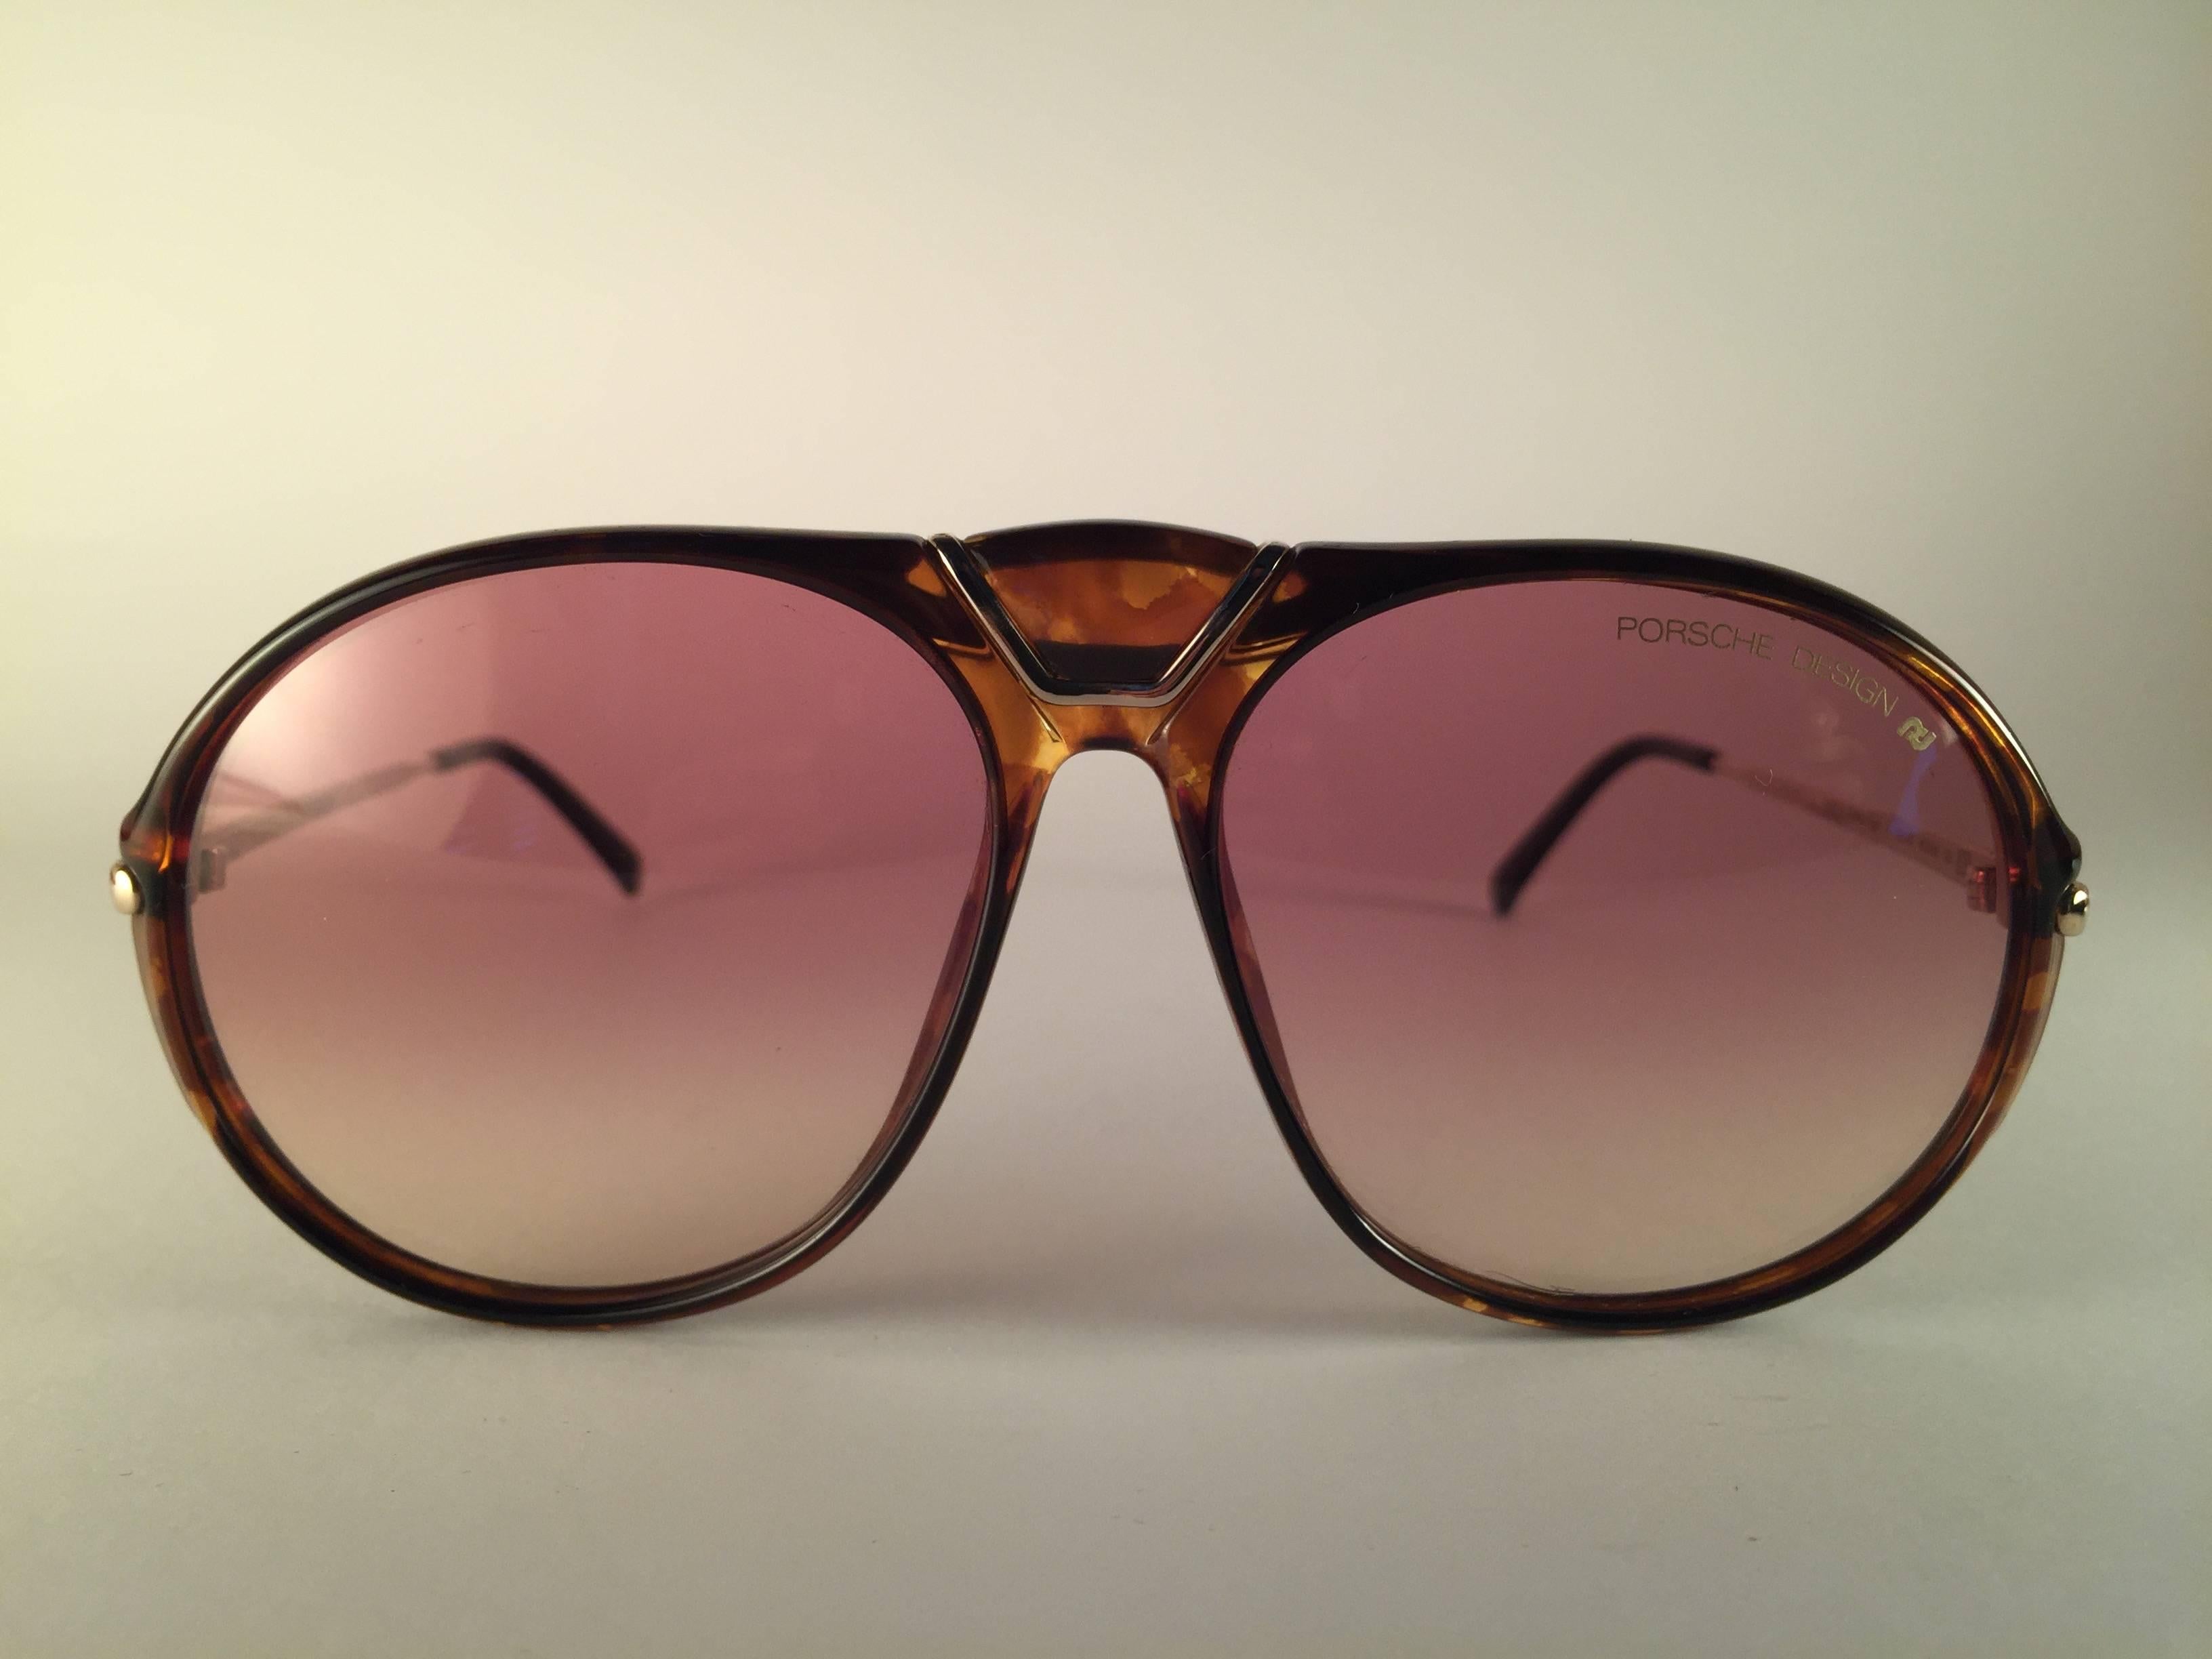 New 1980's Porsche Design 5659 Medium Tortoise and gold frame with light brown gradient lenses.  
Amazing craftsmanship and quality.  
Comes with the original Porsche hard case thats has some wear on it due to nearly 40 years of storage. 
There is